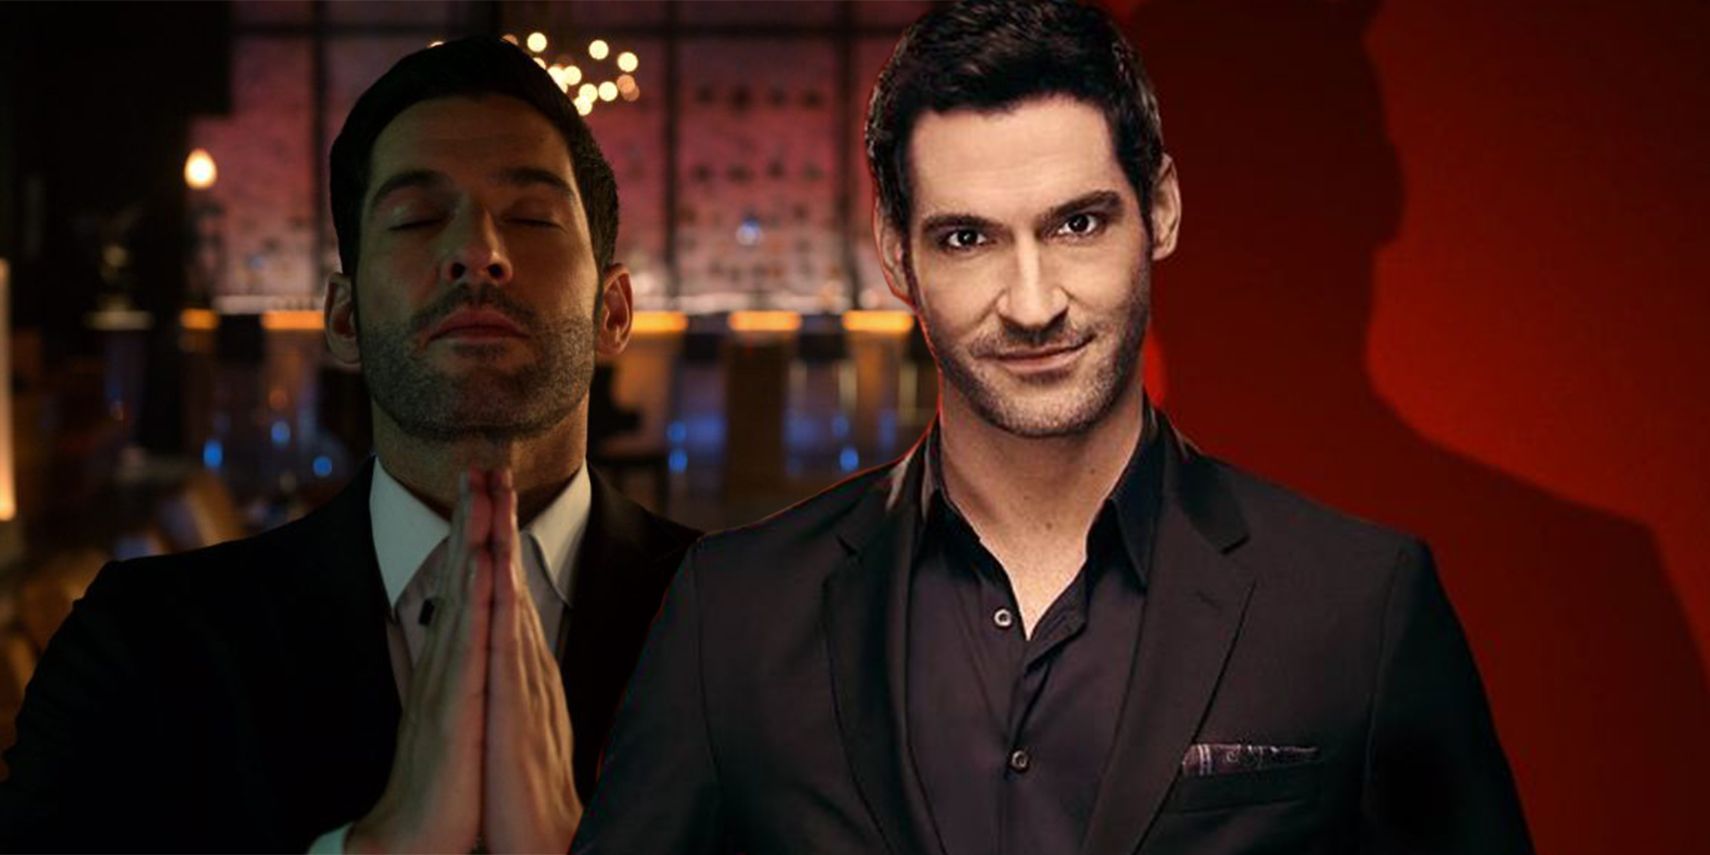 A collage of the Lucifer character from the show praying and looking angelic and looking devilish and smiling